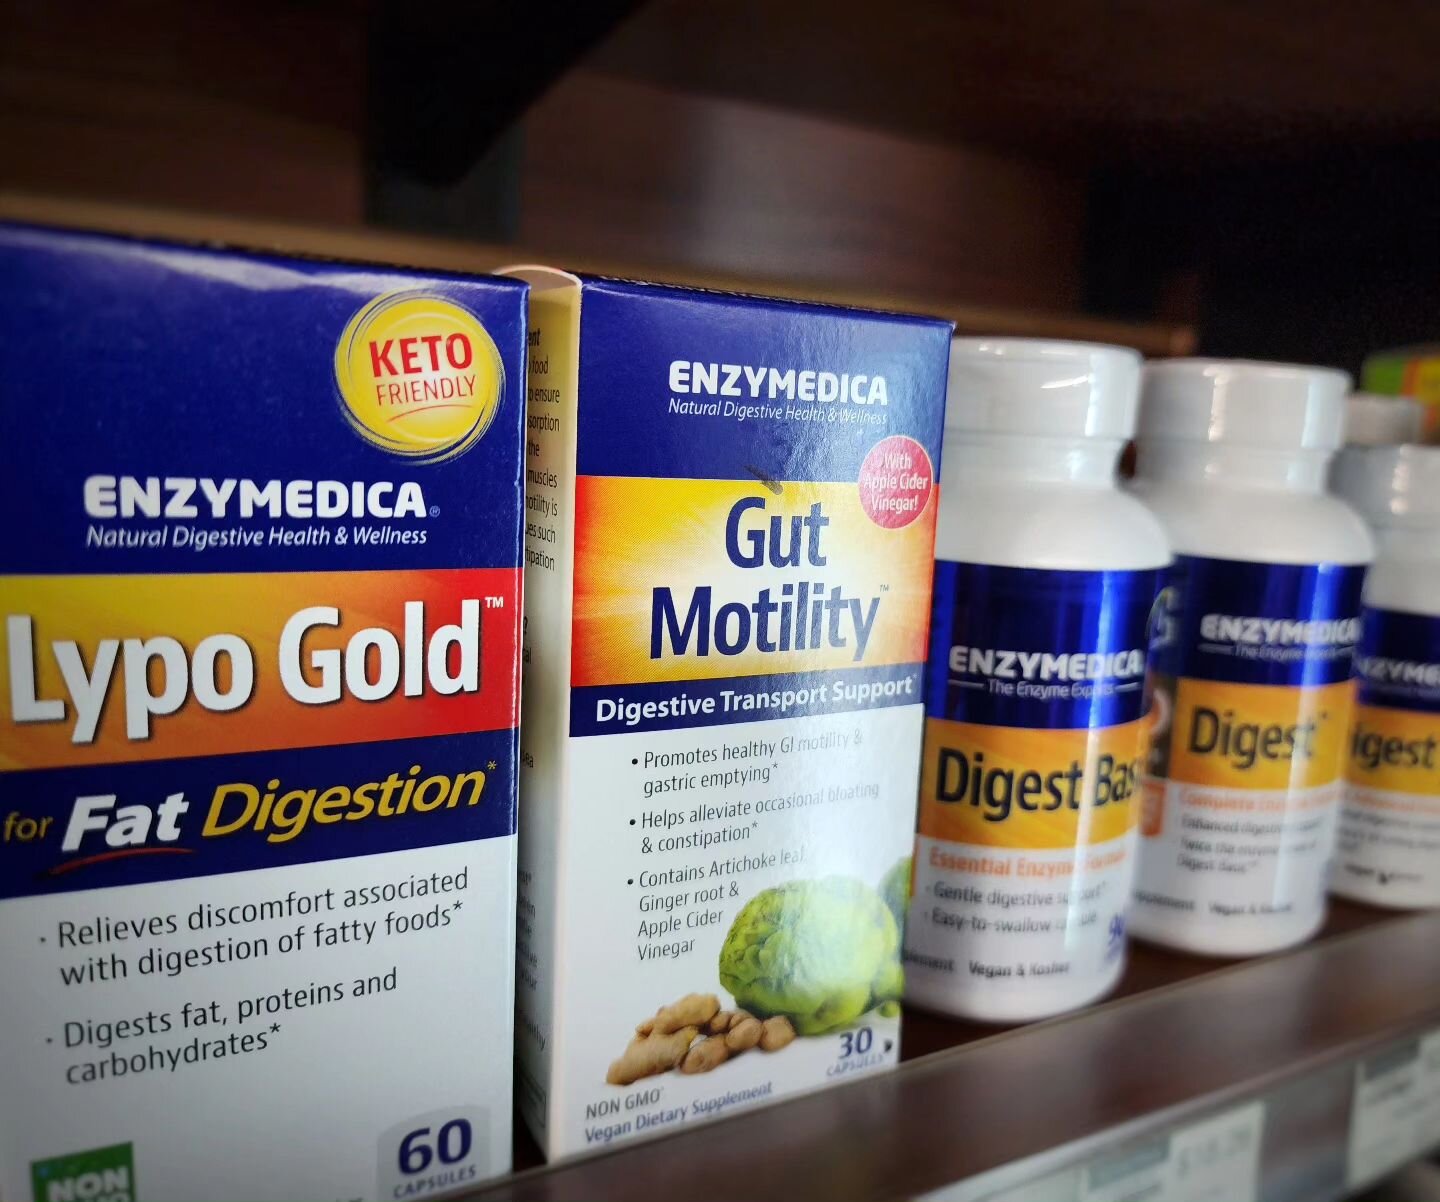 Great digestive health starts with Enzymedica! 
Talk to one of our Natural Health Advisors today to see which of these award winning supplements is right for you!

Always clean, sustainable, and tested for purity 🌿✅️